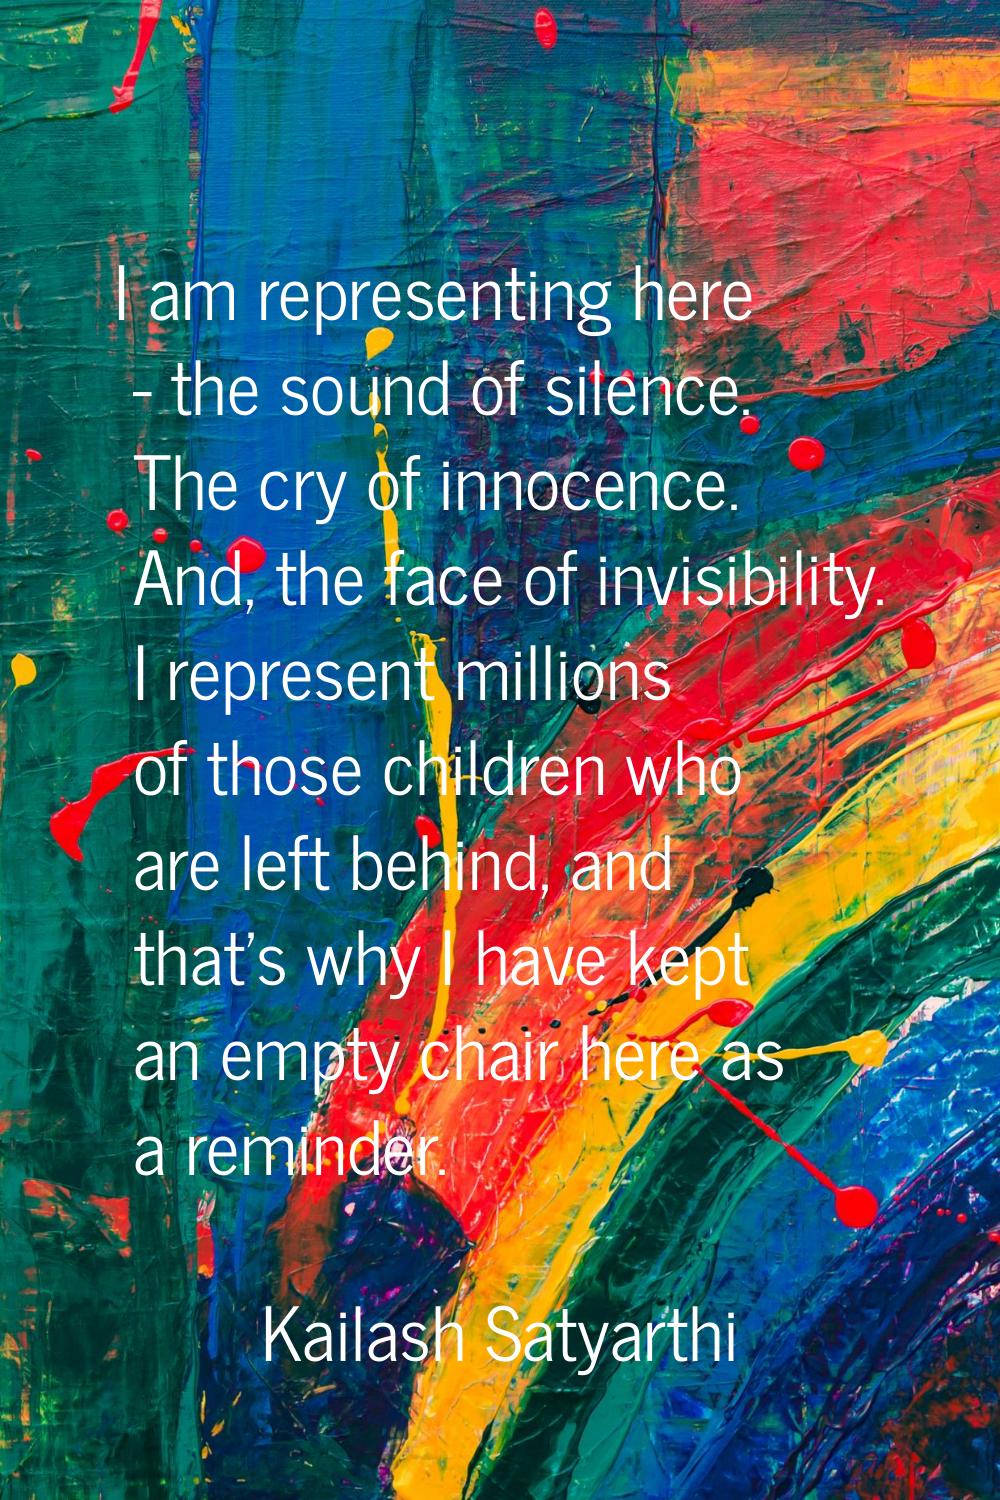 I am representing here - the sound of silence. The cry of innocence. And, the face of invisibility.